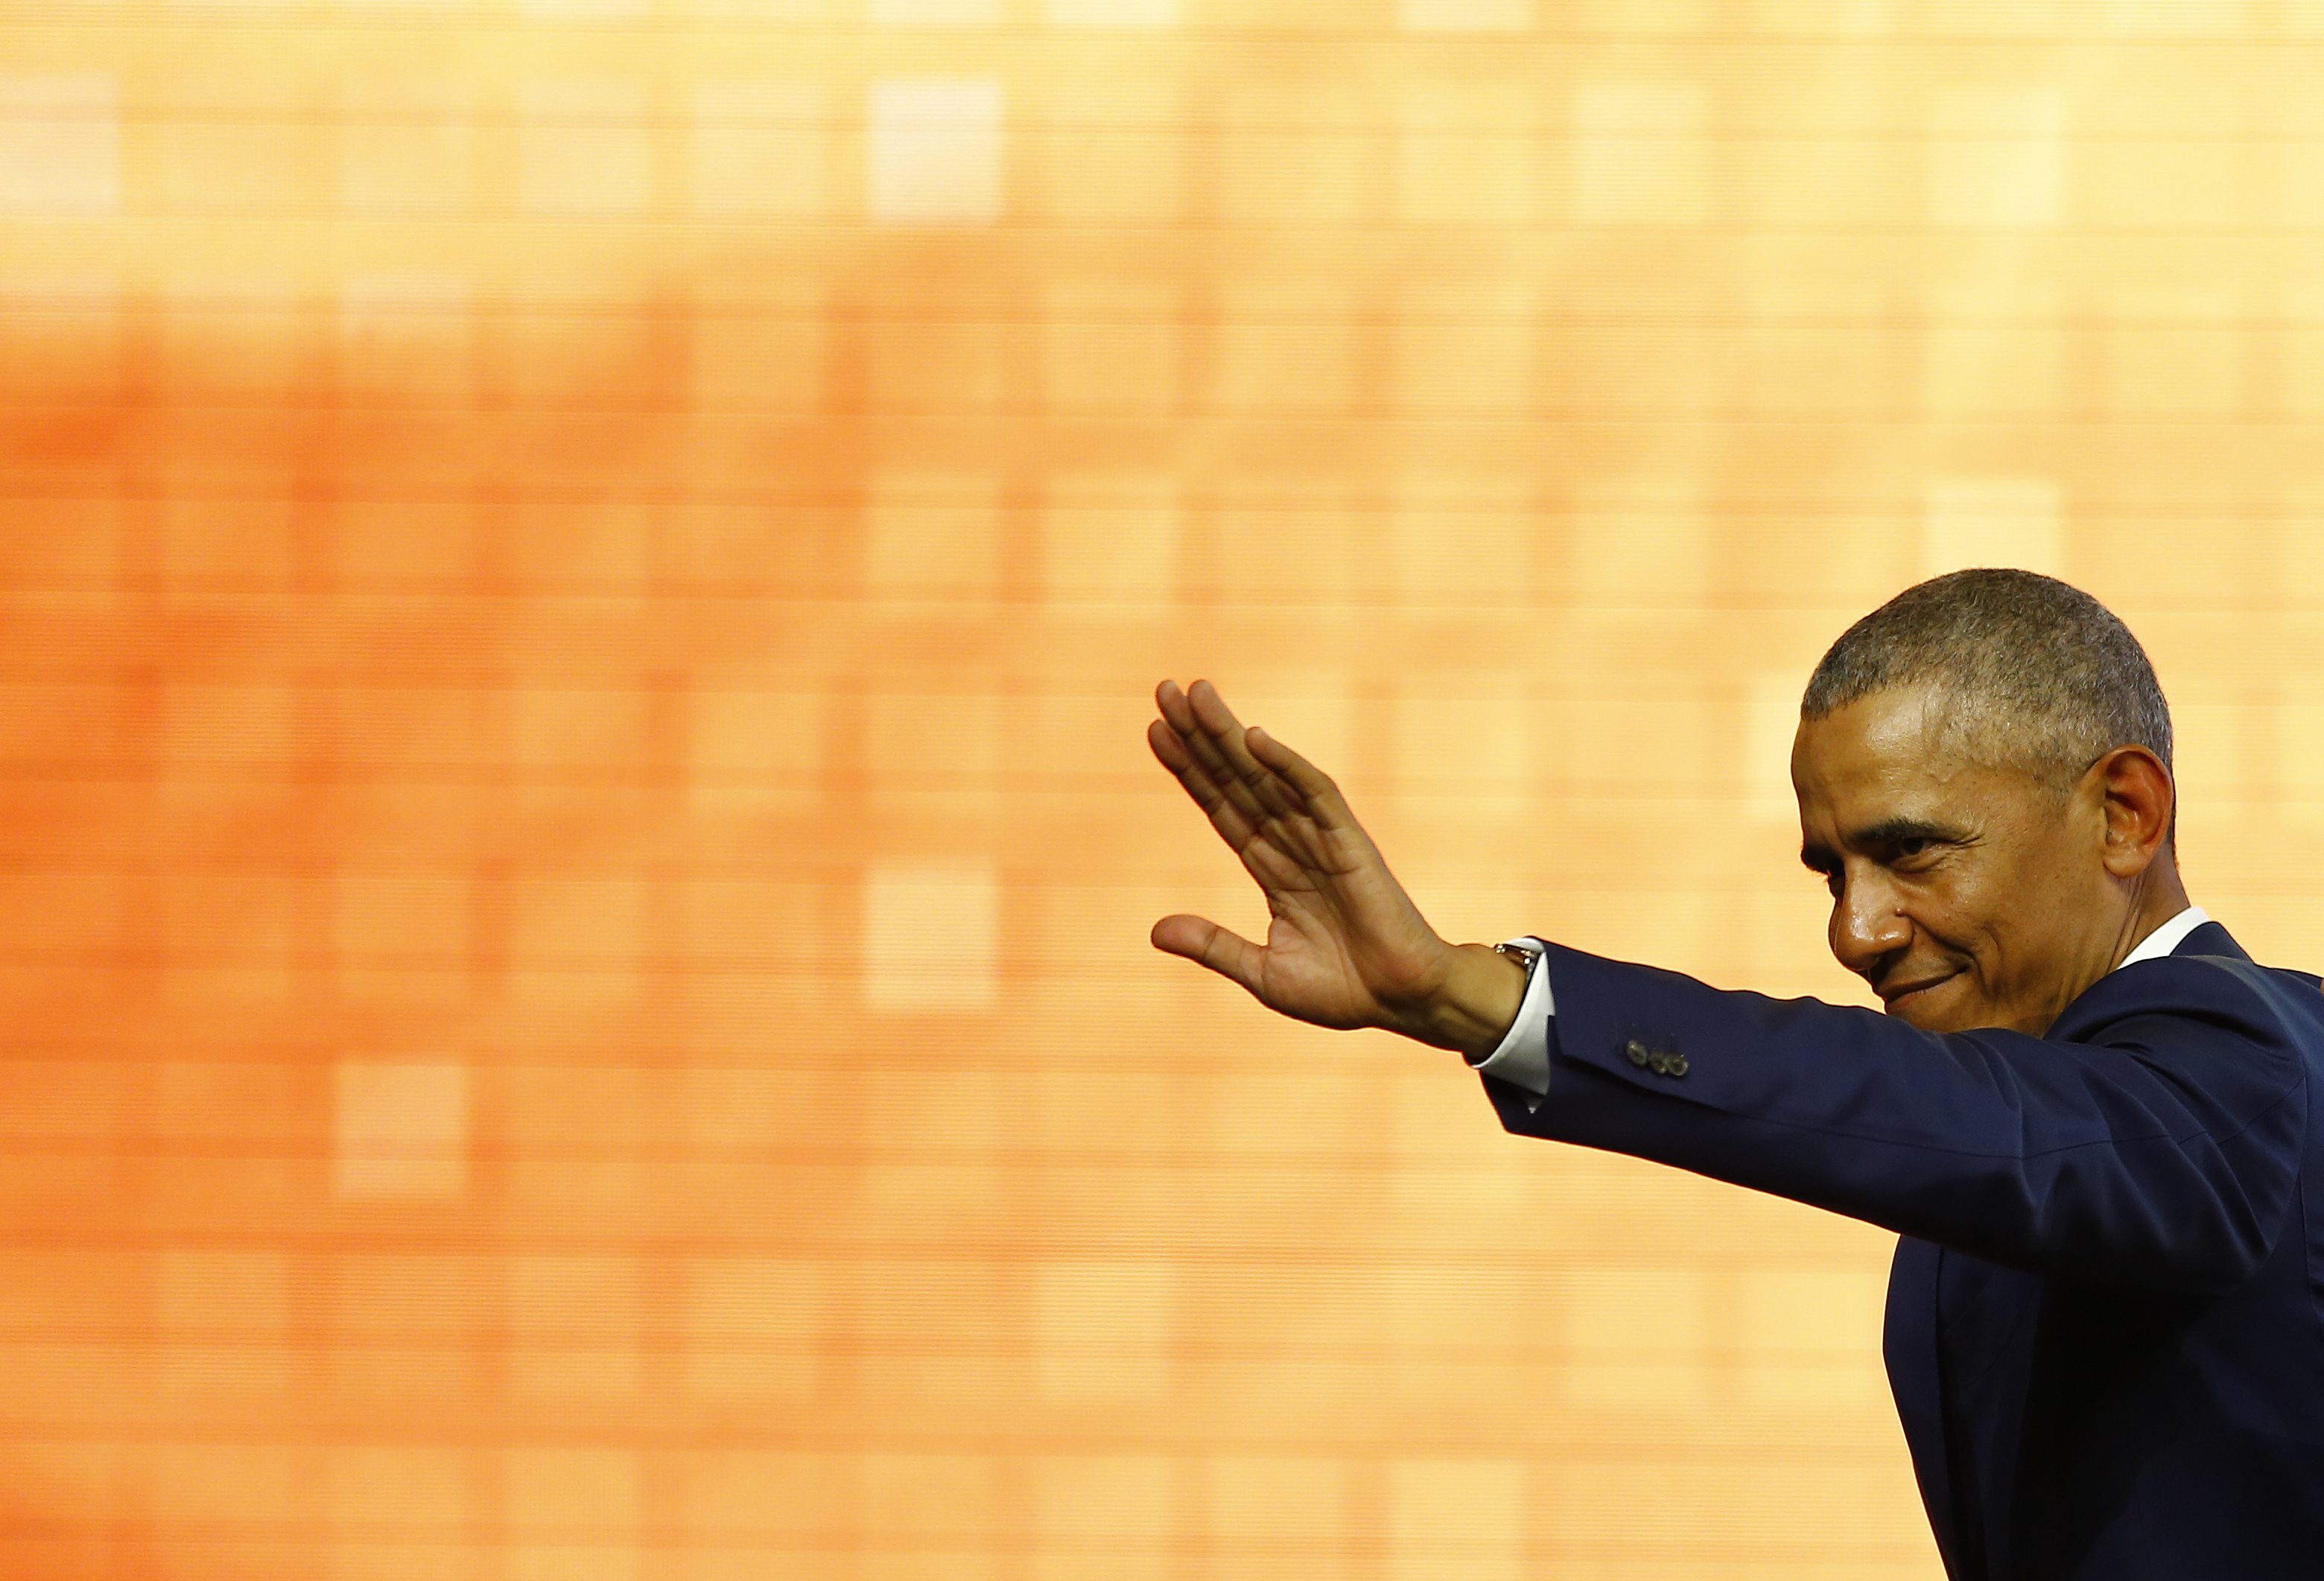 Former U.S. President Barack Obama waves during the World Travel and Tourism Council Global Summit on April 03, 2019 in Seville, Spain. (Marcelo del Pozo—Getty Images)